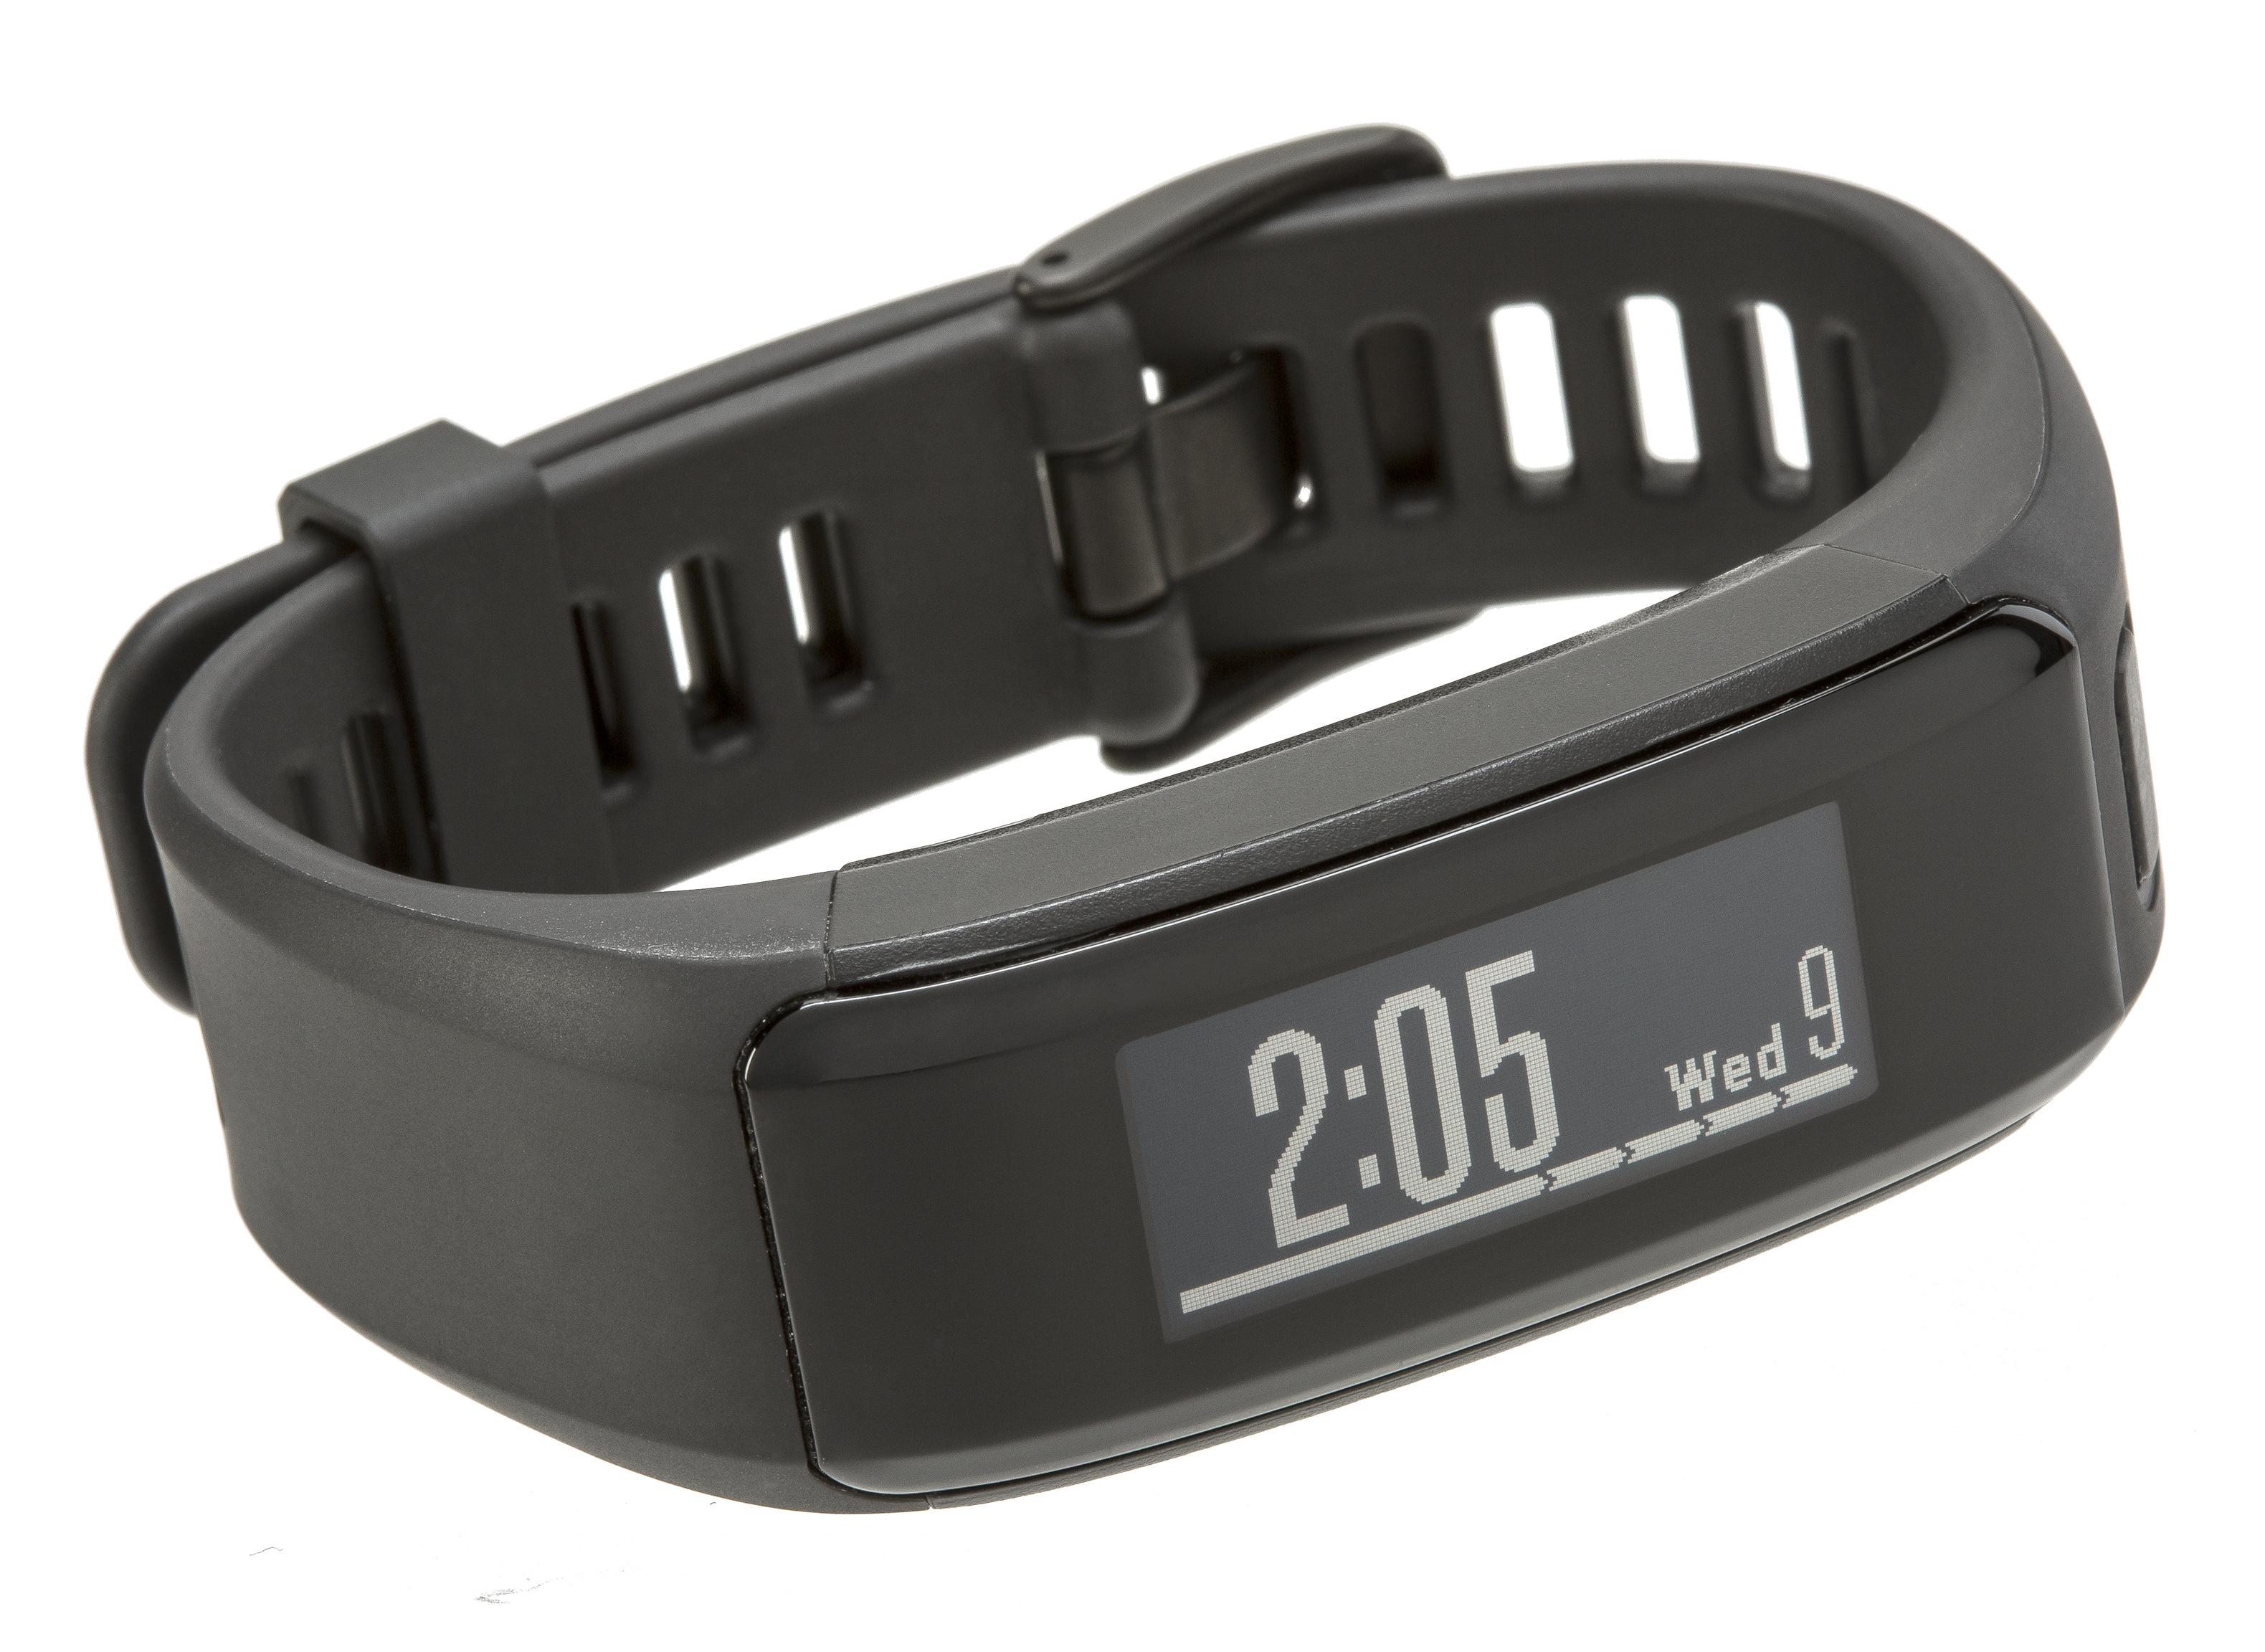 Garmin HR Fitness Tracker Review - Consumer Reports